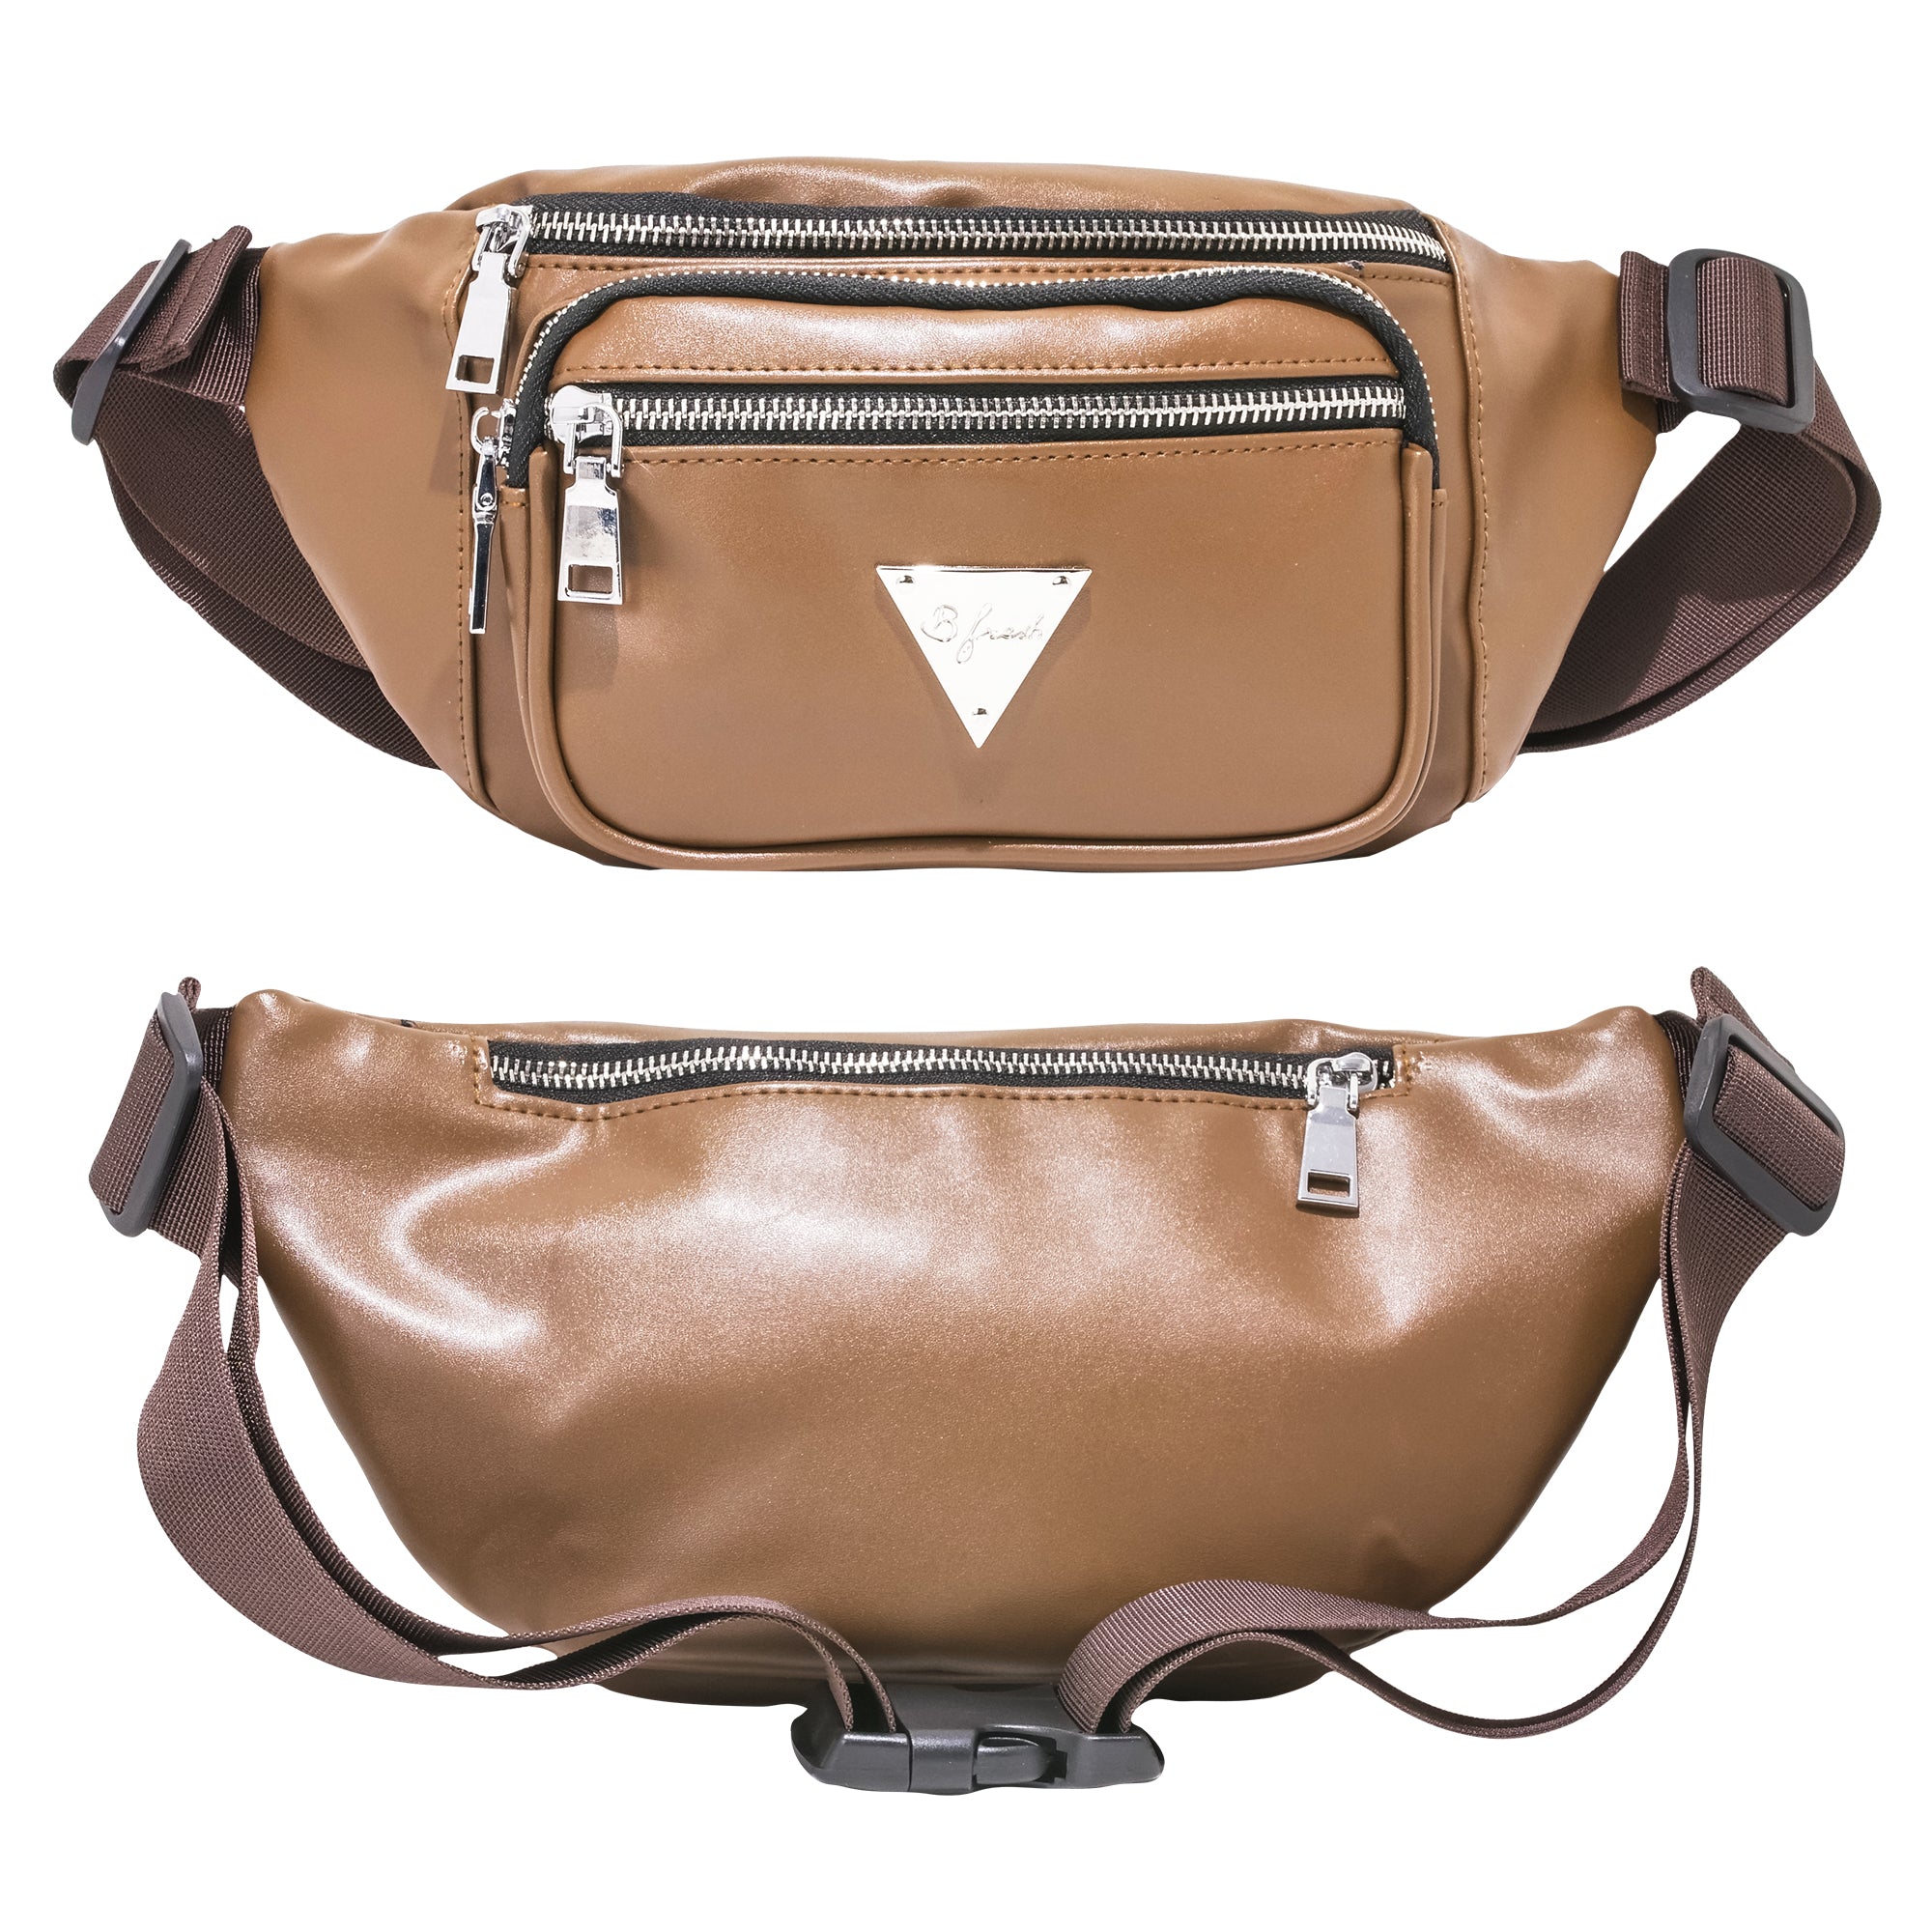 Indianapolis Jones Fanny Pack - B Fresh Gear - Awesome vintage brown faux leather retro fanny pack bum bag with brown strap and silver zippers